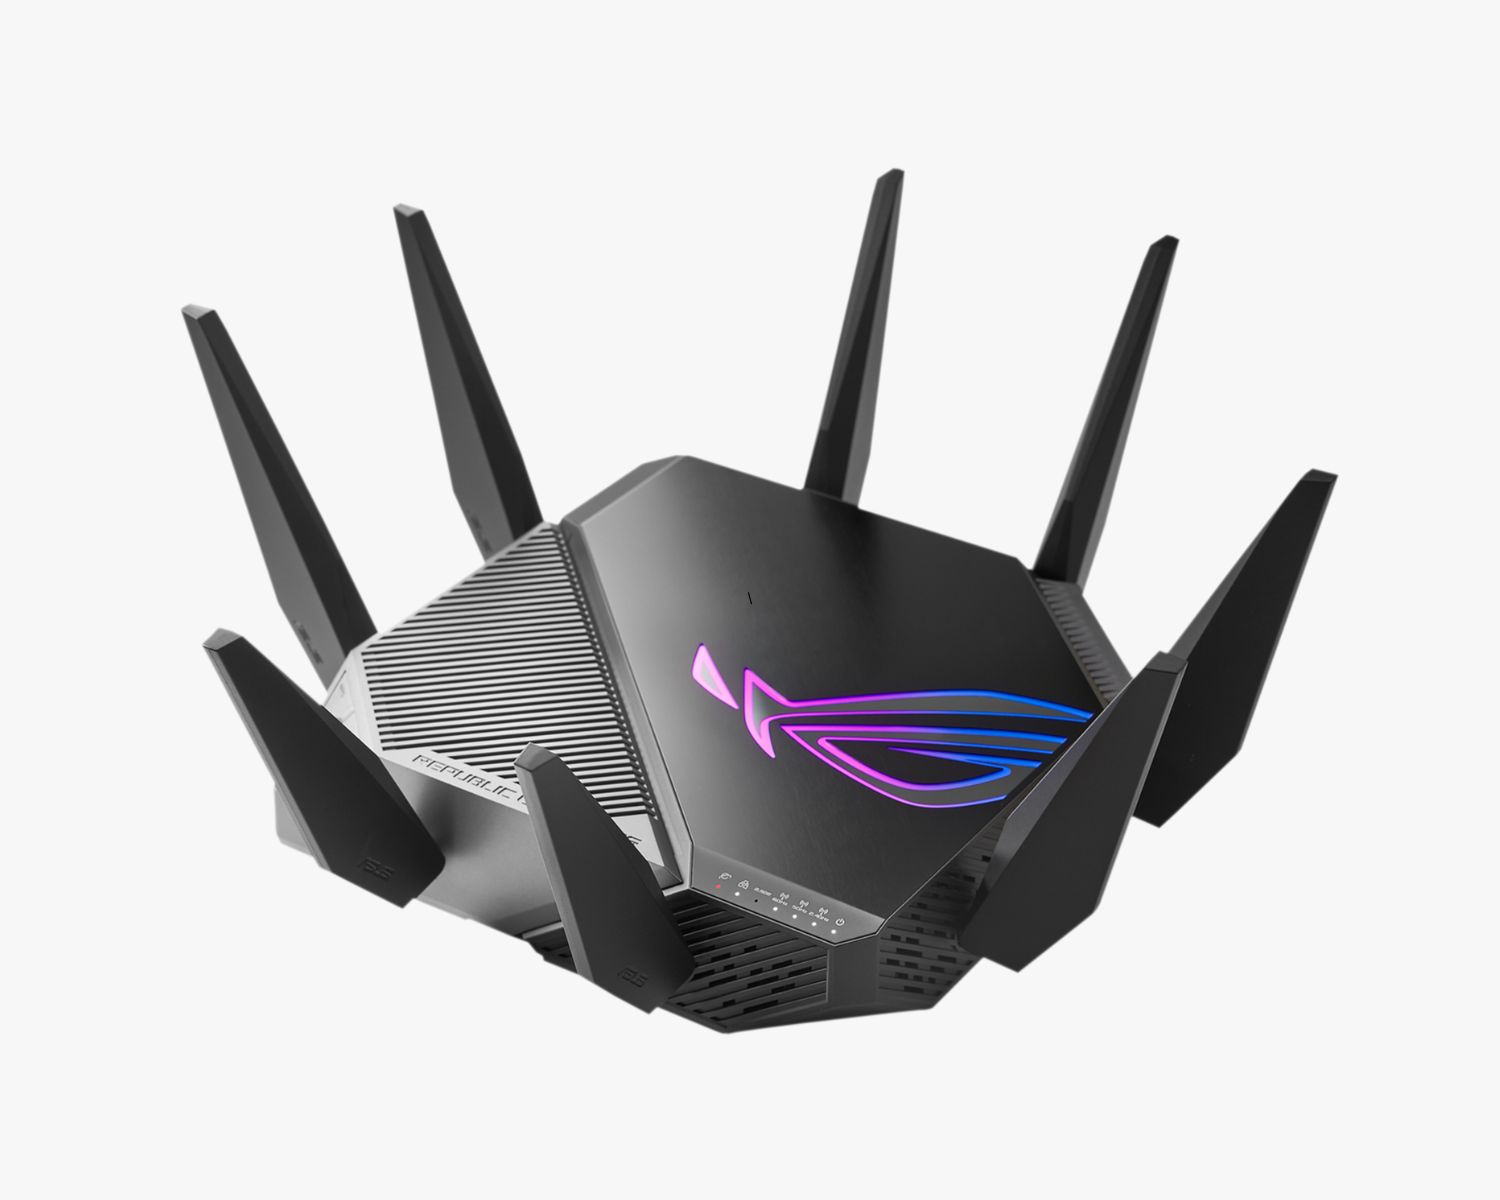 Who Makes ASUS Routers